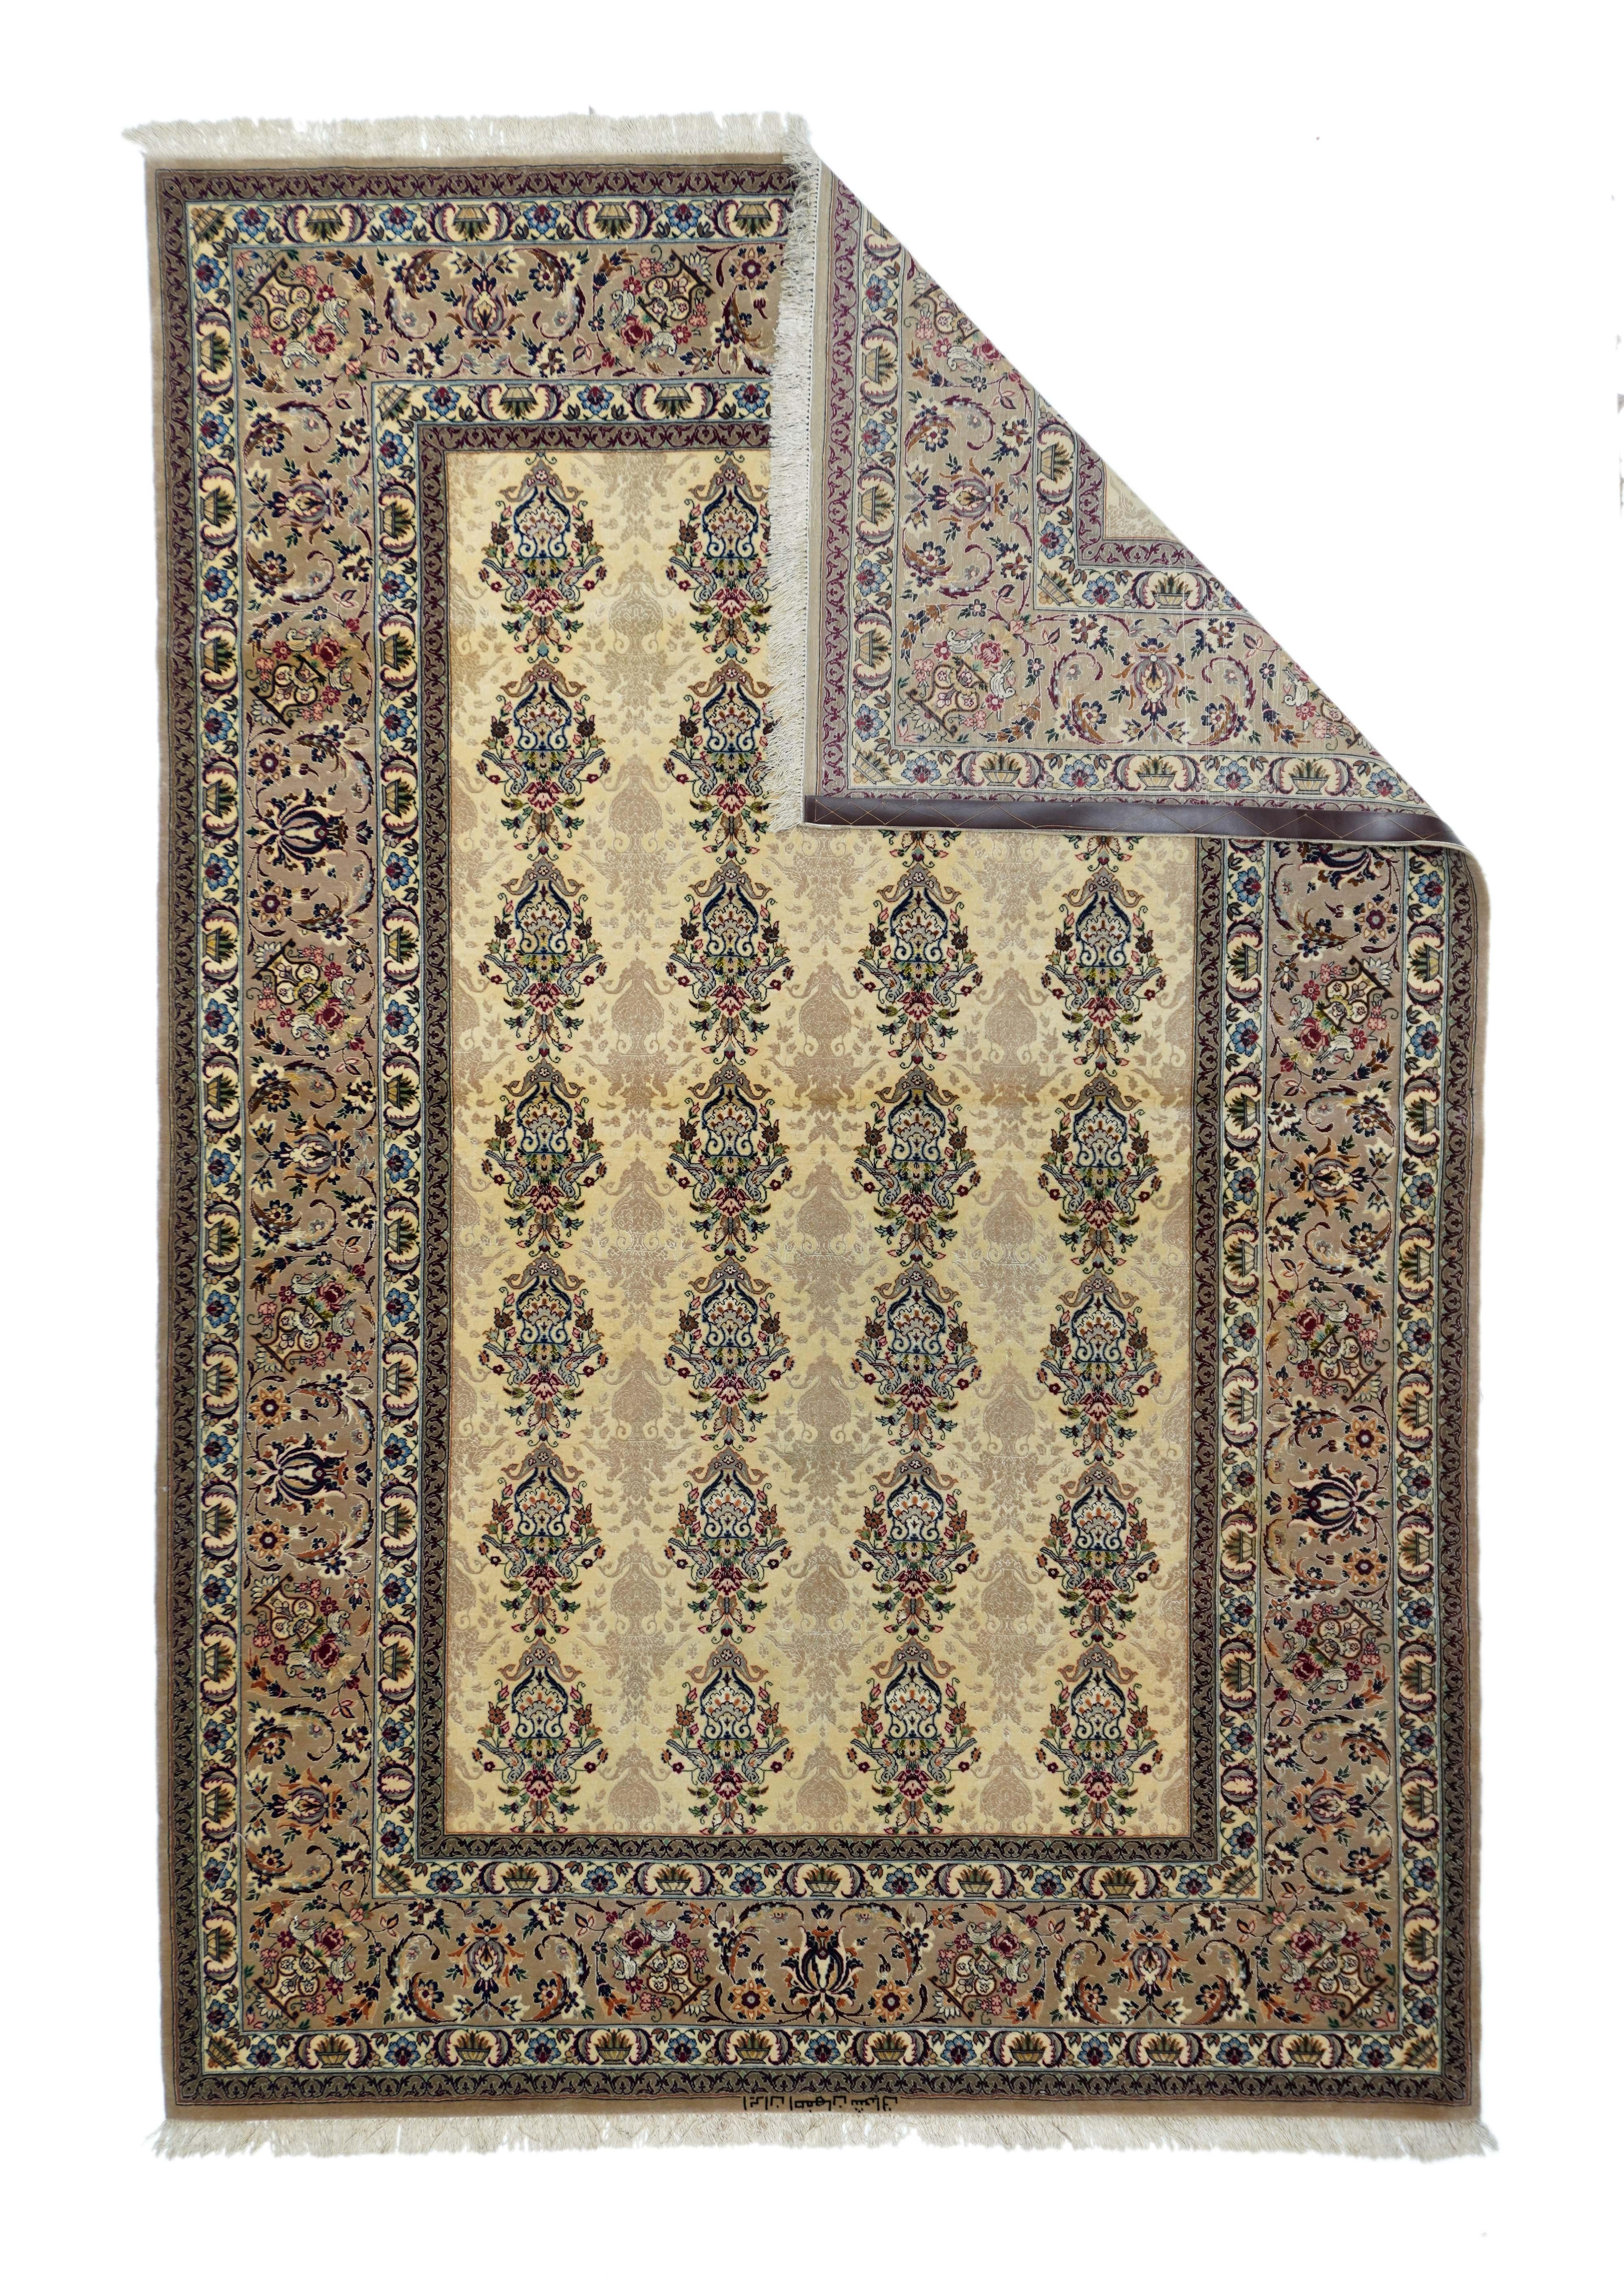 Vintage Isfahan Rug 5'1'' x 7'6''. Not the classic medallion Isfahan's from Central Persia, but as textile-inspired, finely woven, top condition piece with a four by seven repeating vase, paired bird and bouquet major pattern and a tonally subdued